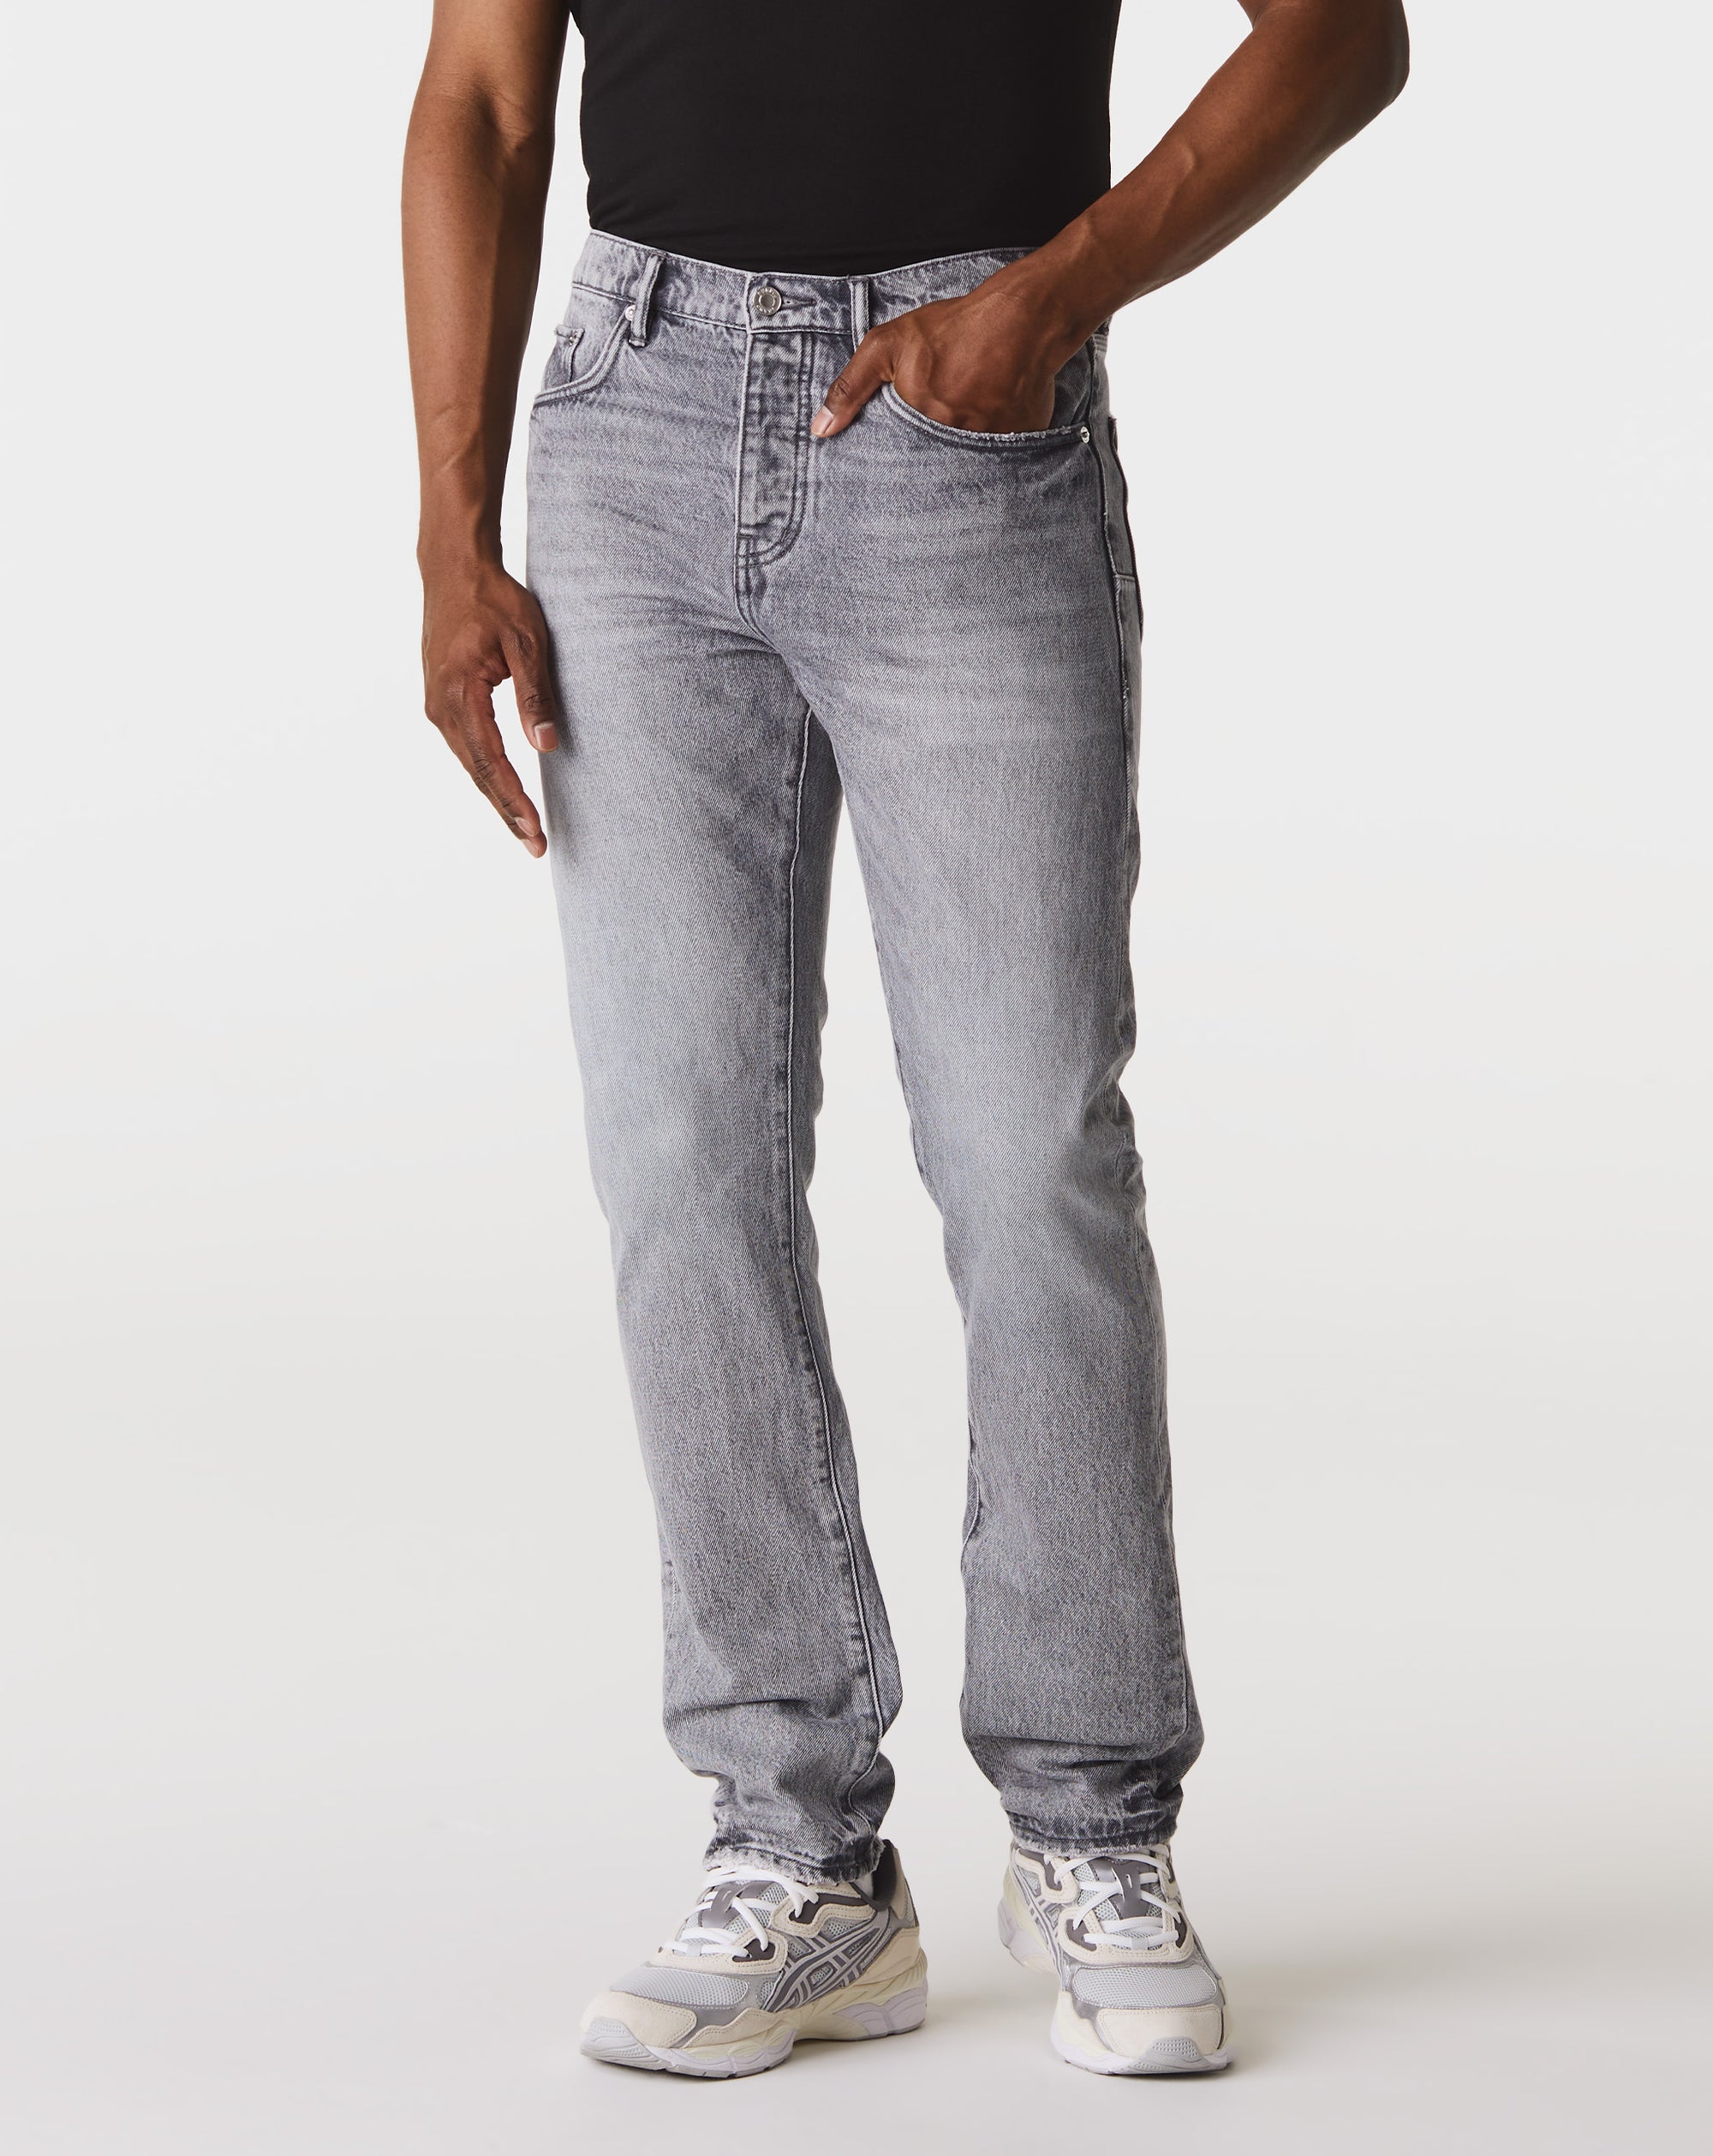 Purple Brand P005 Mid Rise Straight Jeans - Rule of Next Apparel